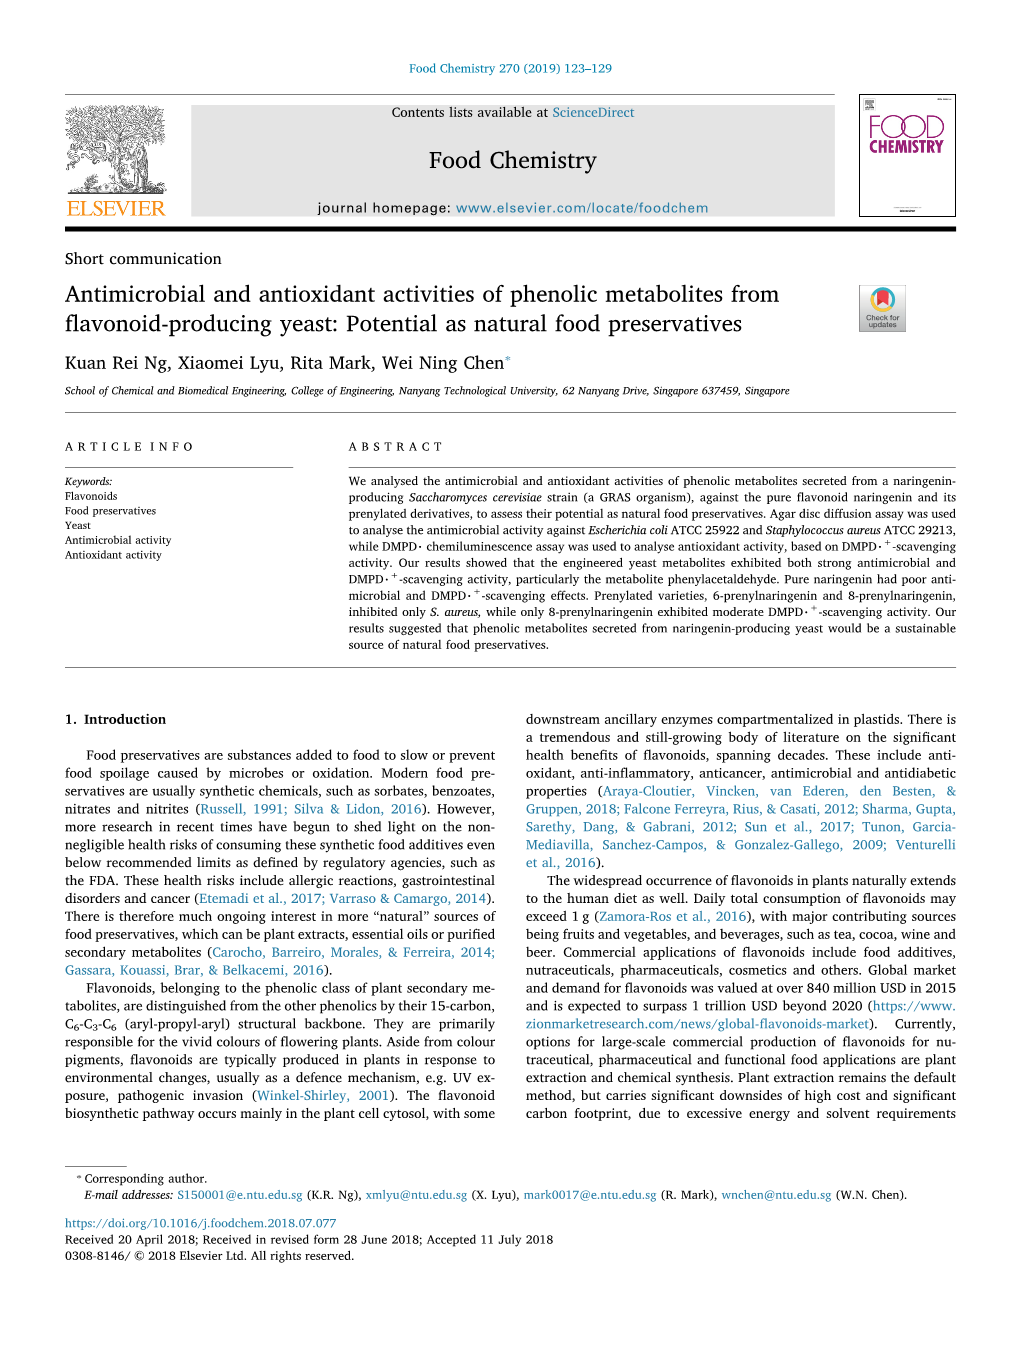 Antimicrobial and Antioxidant Activities of Phenolic Metabolites From